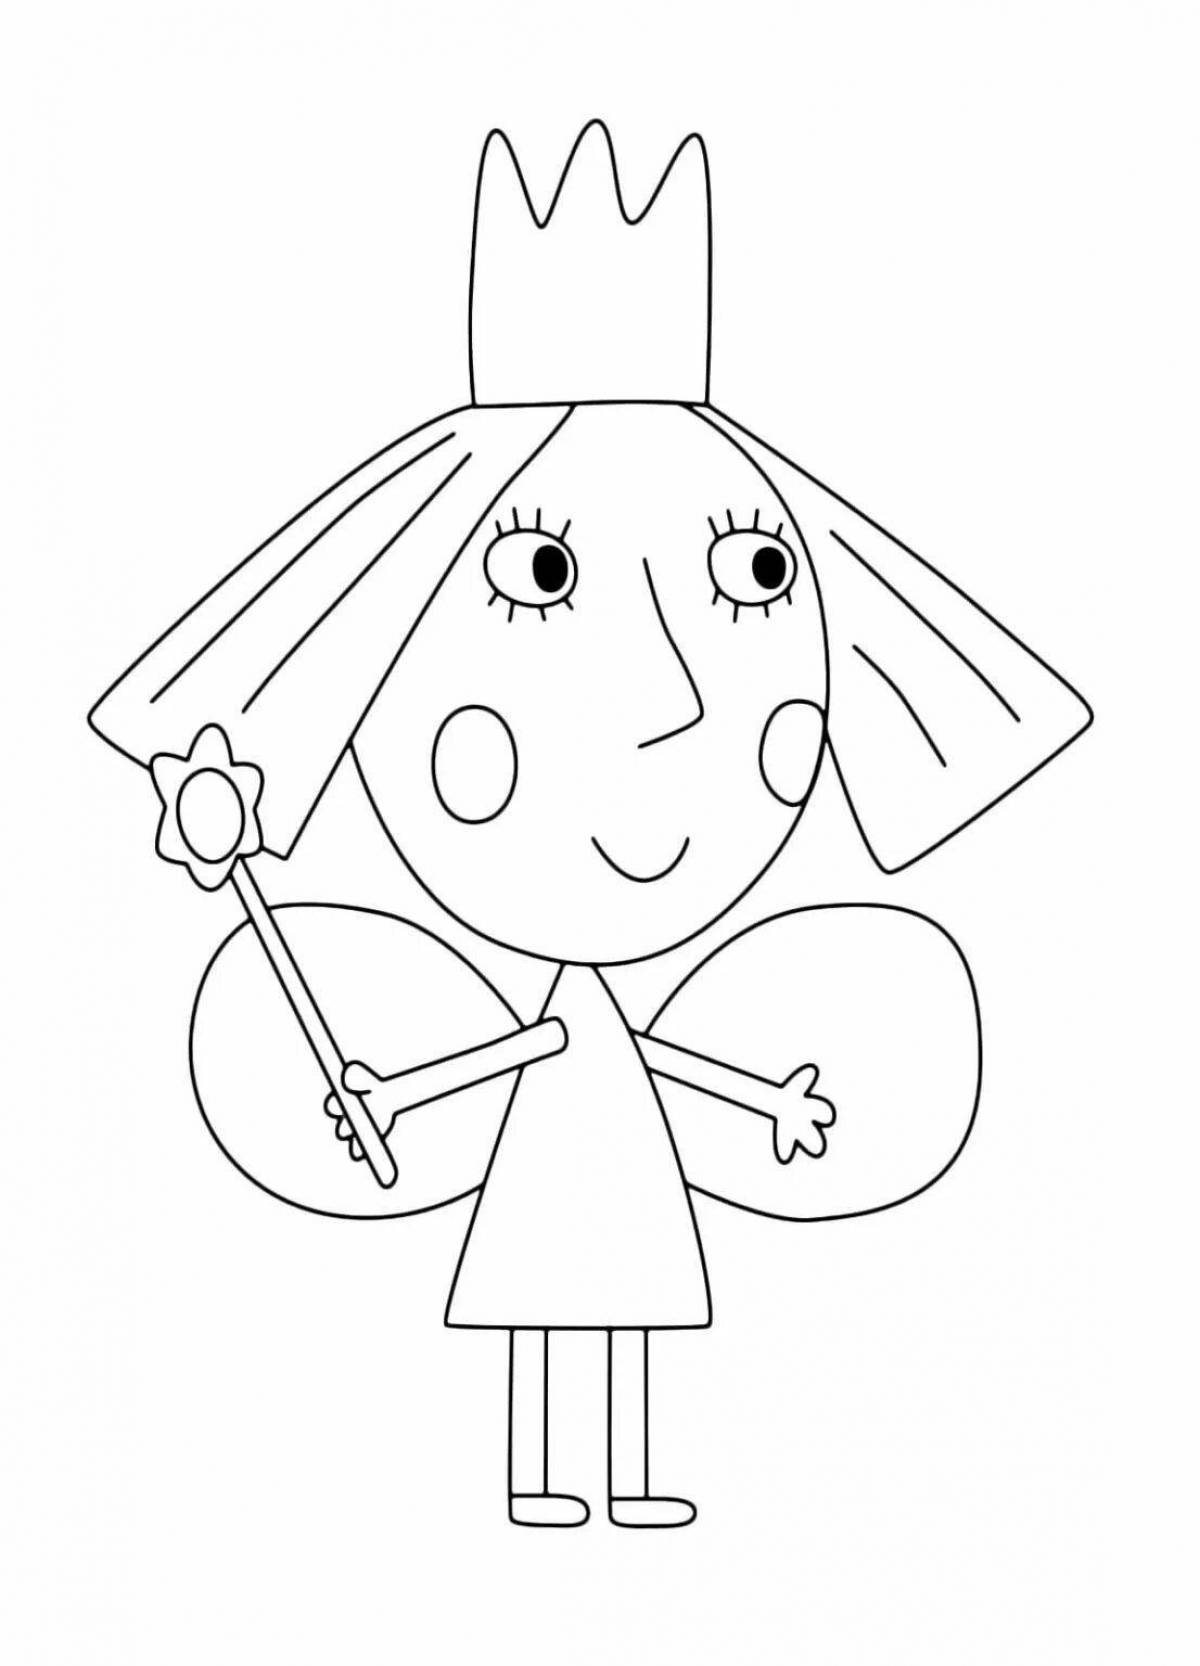 Fancy ben and holly coloring pages